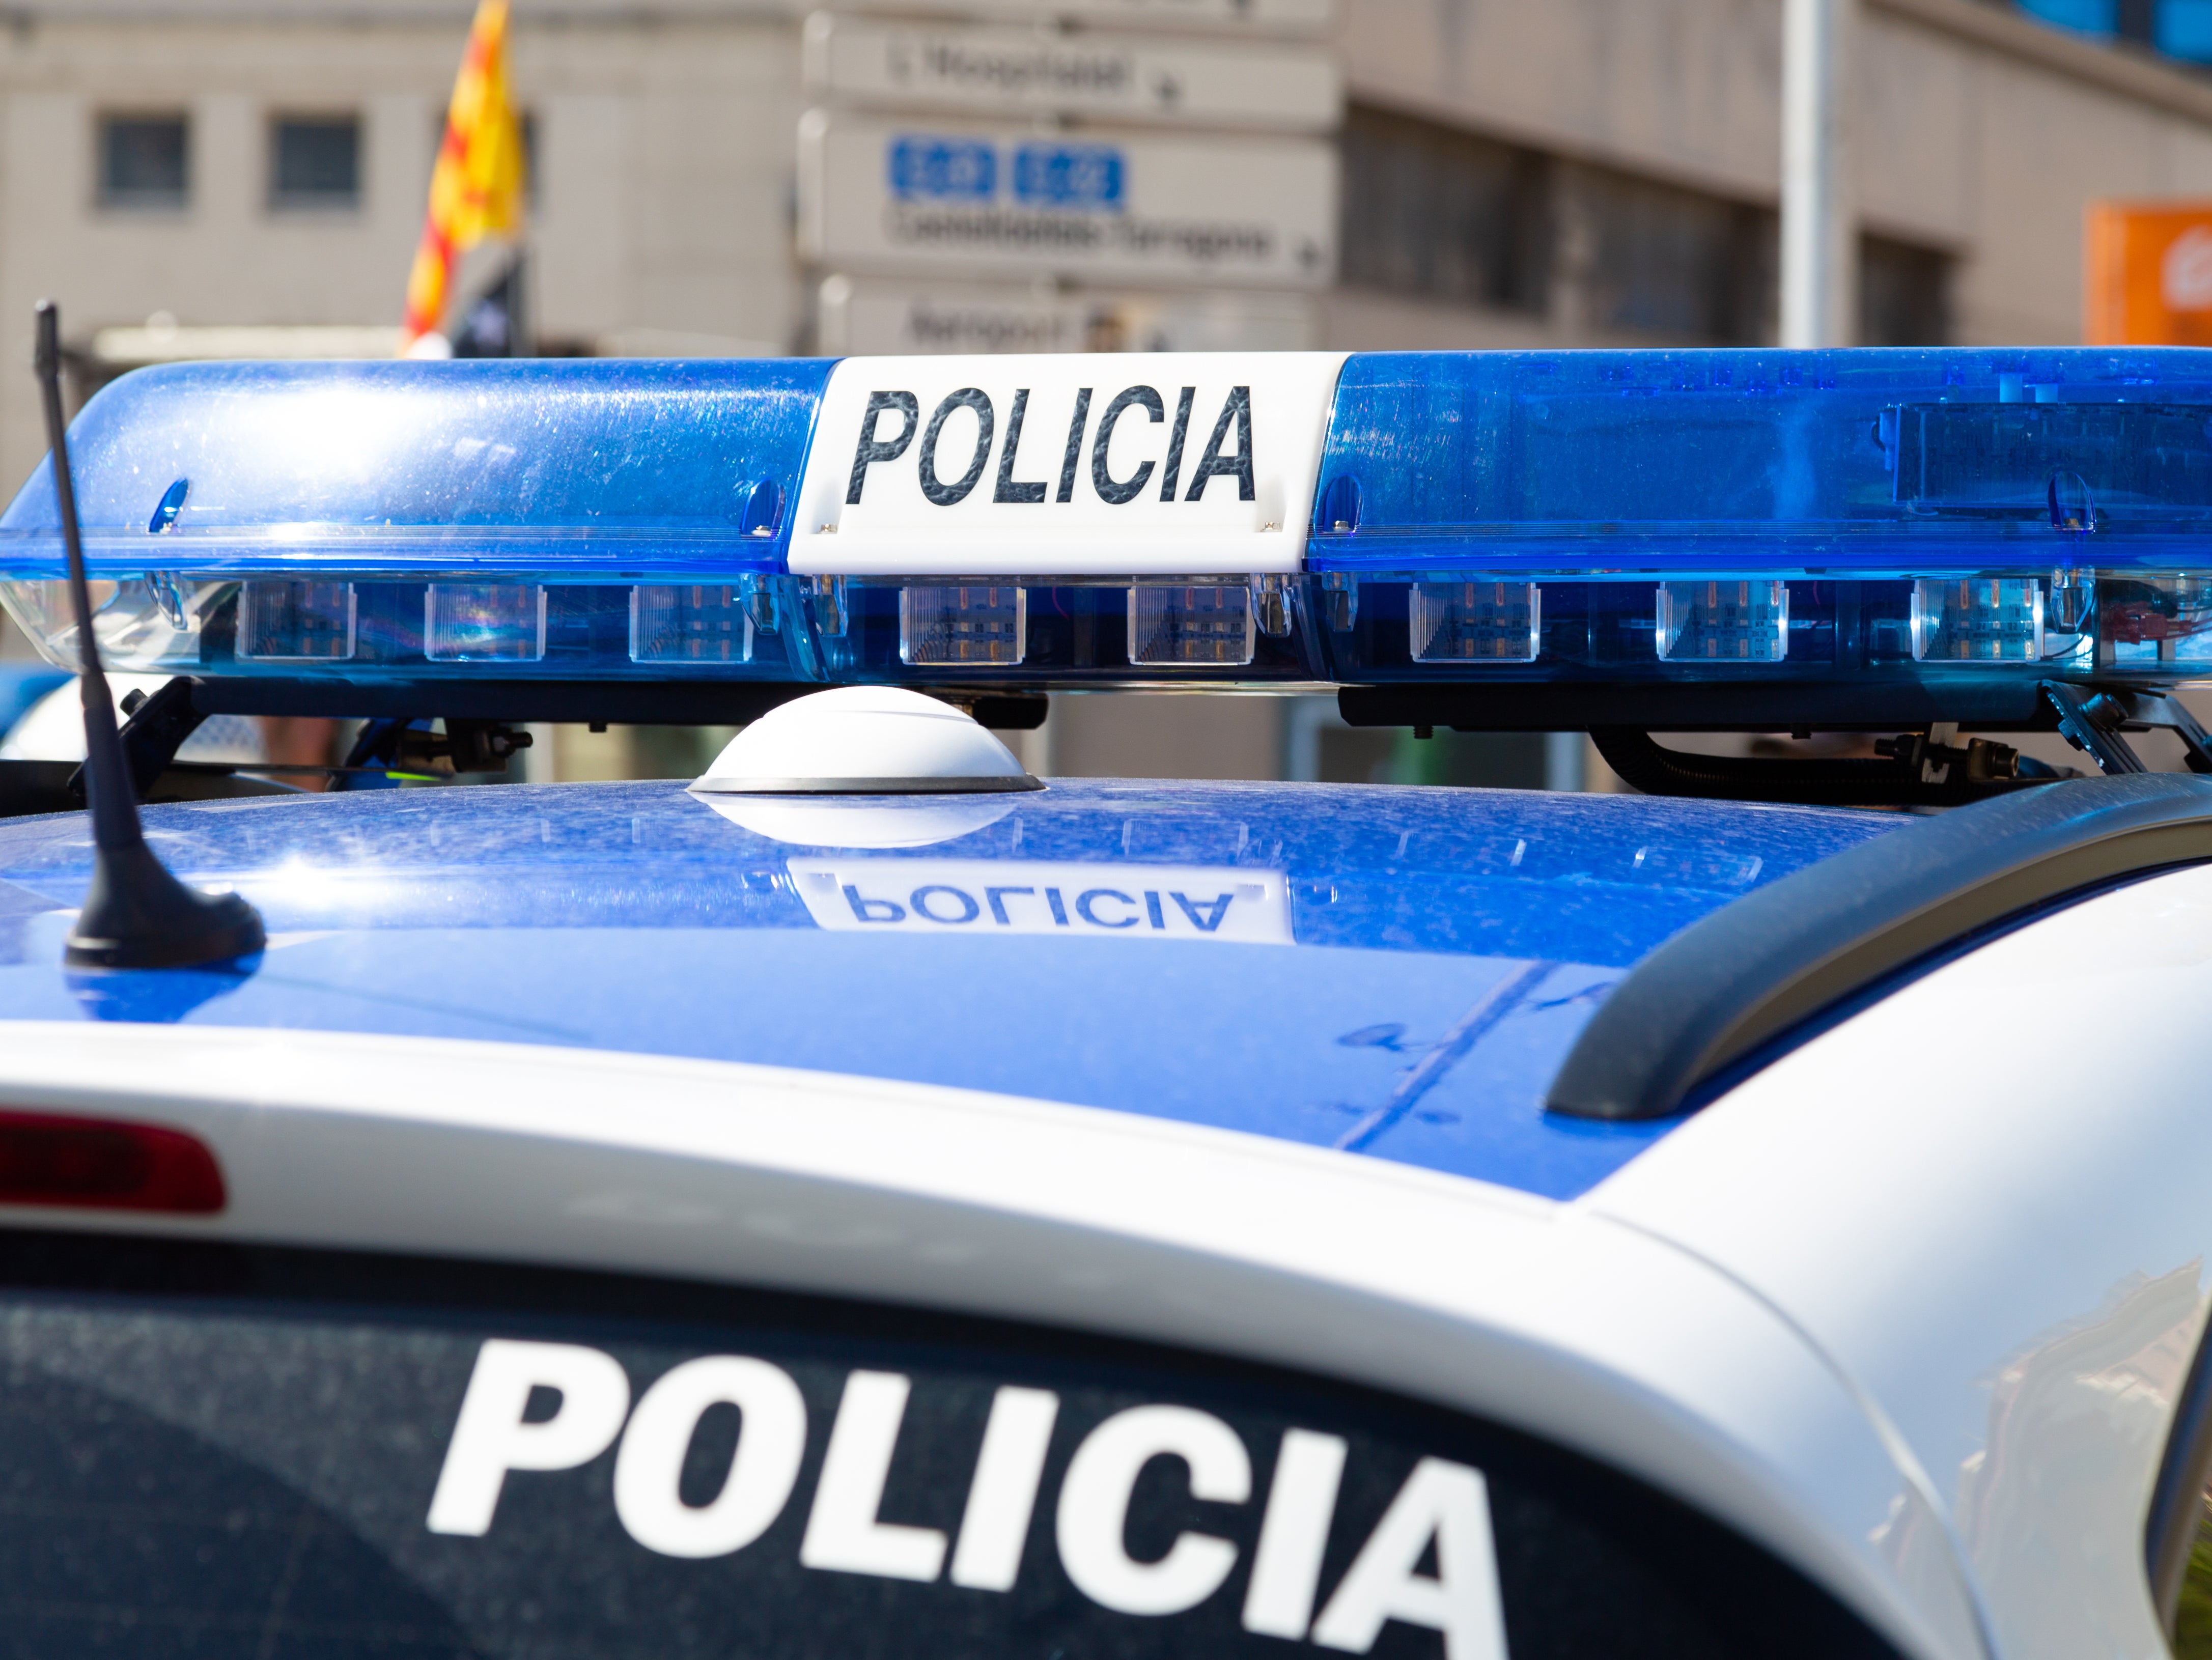 Police in Spain are investigating after a fight at a nightclub in Marbella